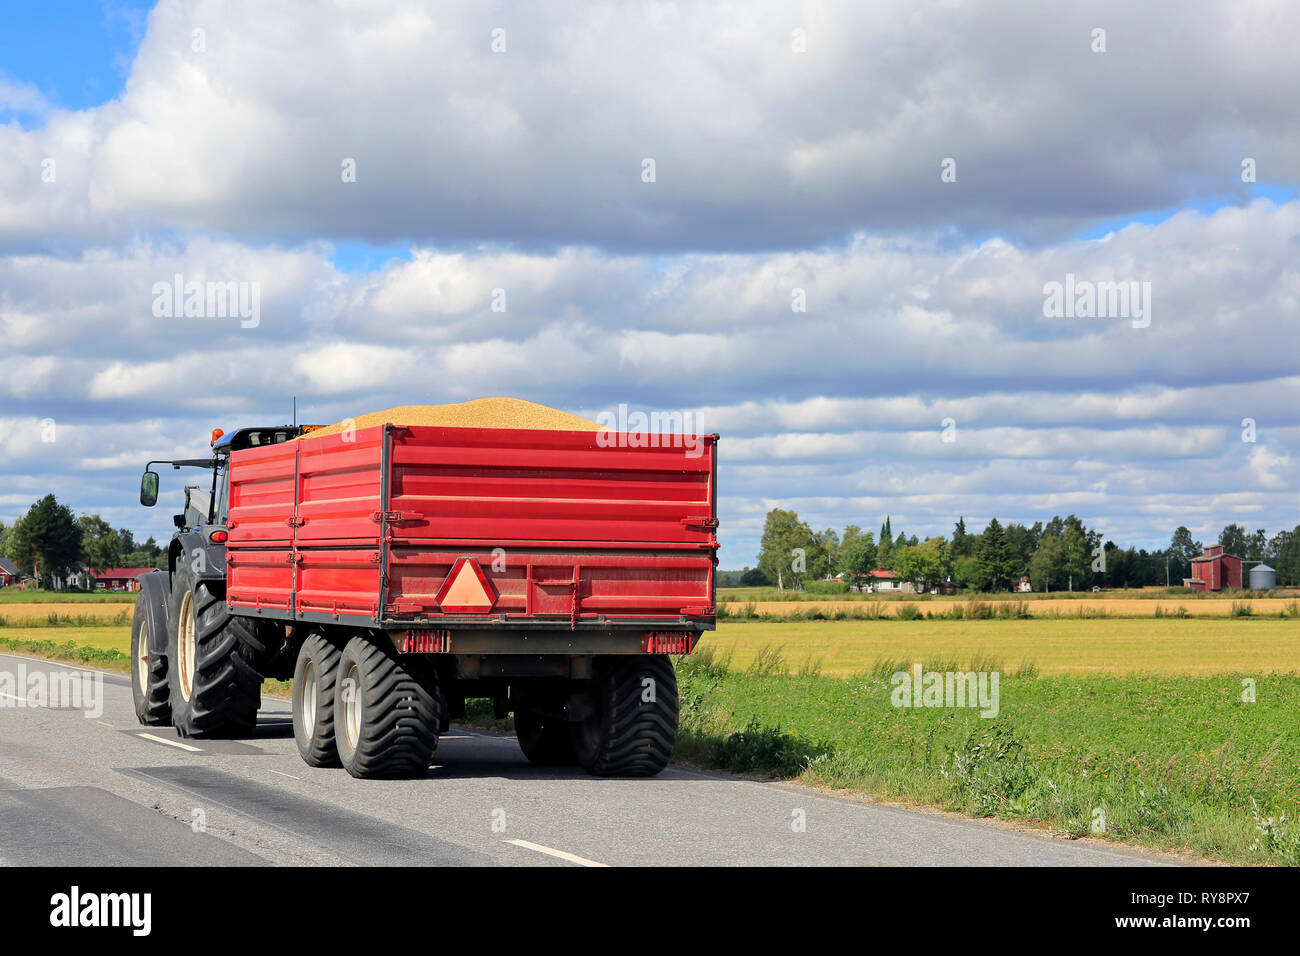 Tractor pulls red agricultural trailer with a full load of harvested grain along country road on a sunny day in autumn harvest time. Stock Photo